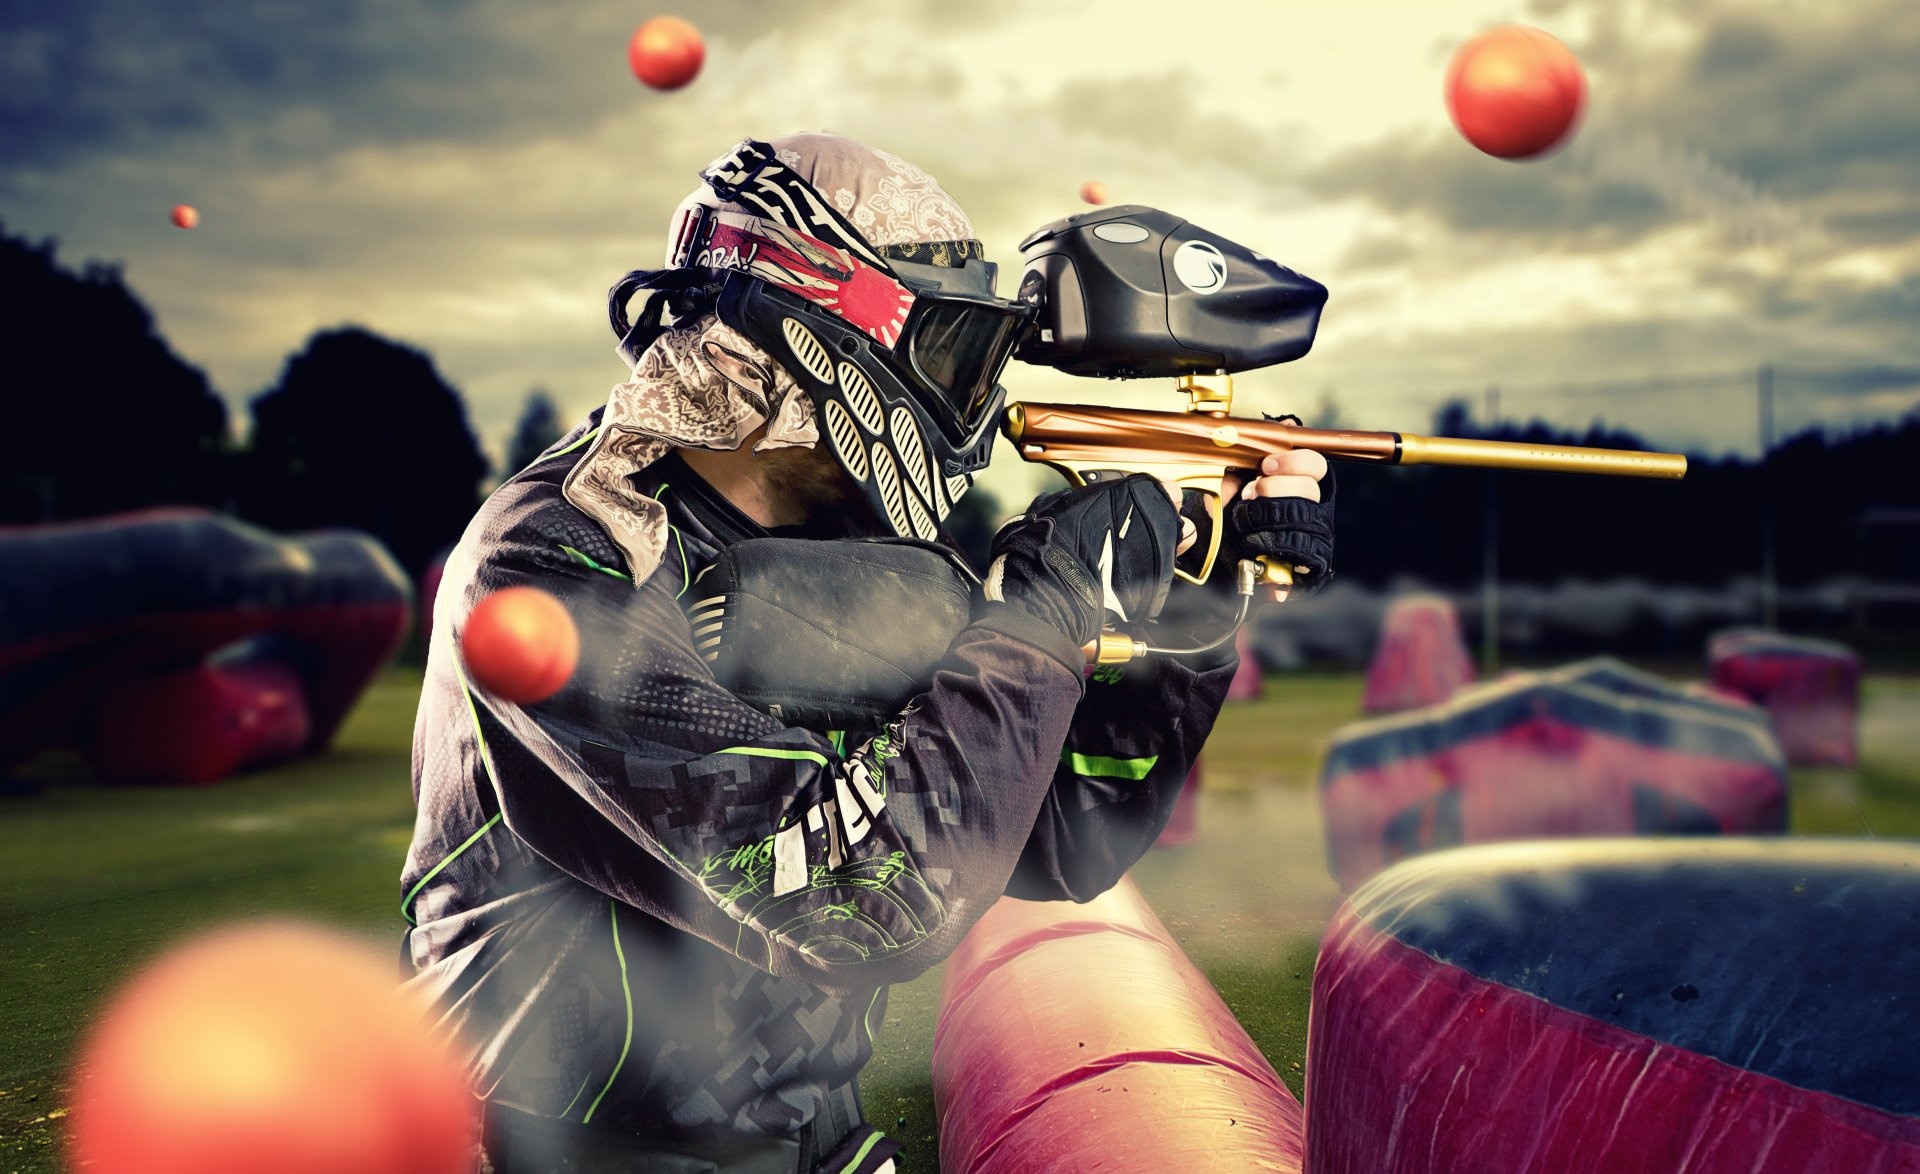 Paintball, HD wallpapers, Action-packed backgrounds, Visual delight, 1920x1180 HD Desktop